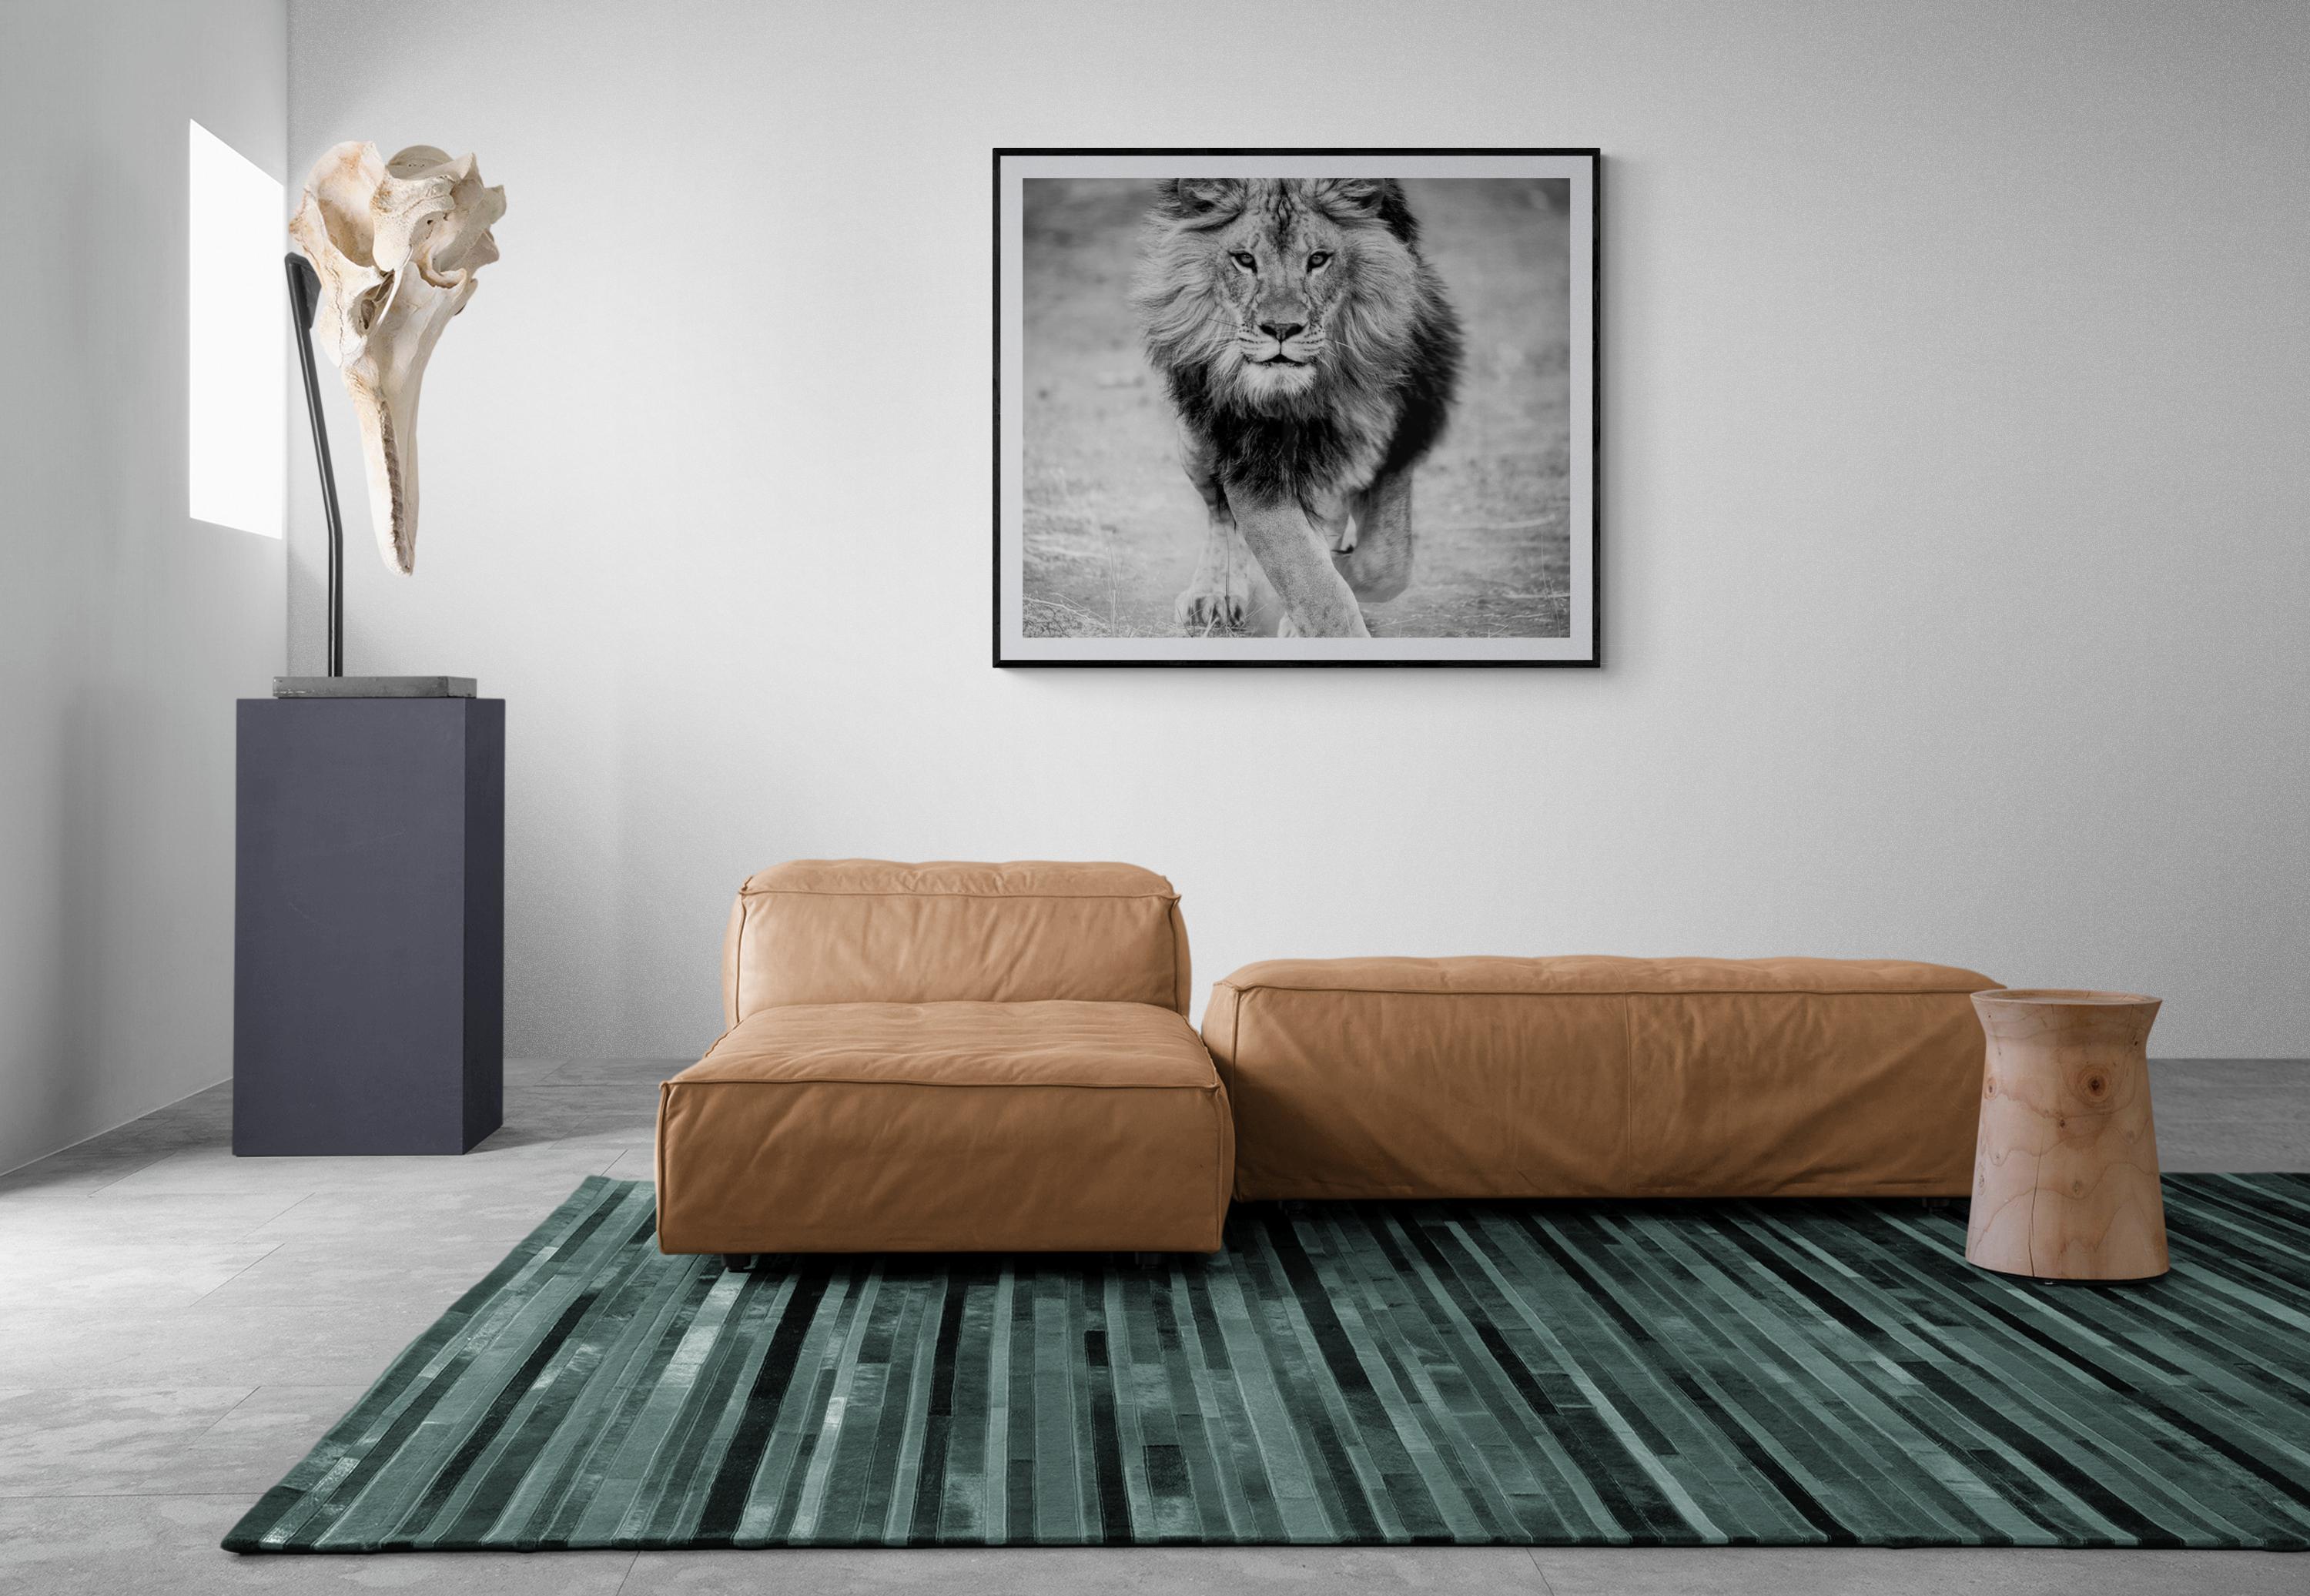 Panthera Leo - 40x60, Black and White Lion Photograph, Lion Photography Unsigned 4